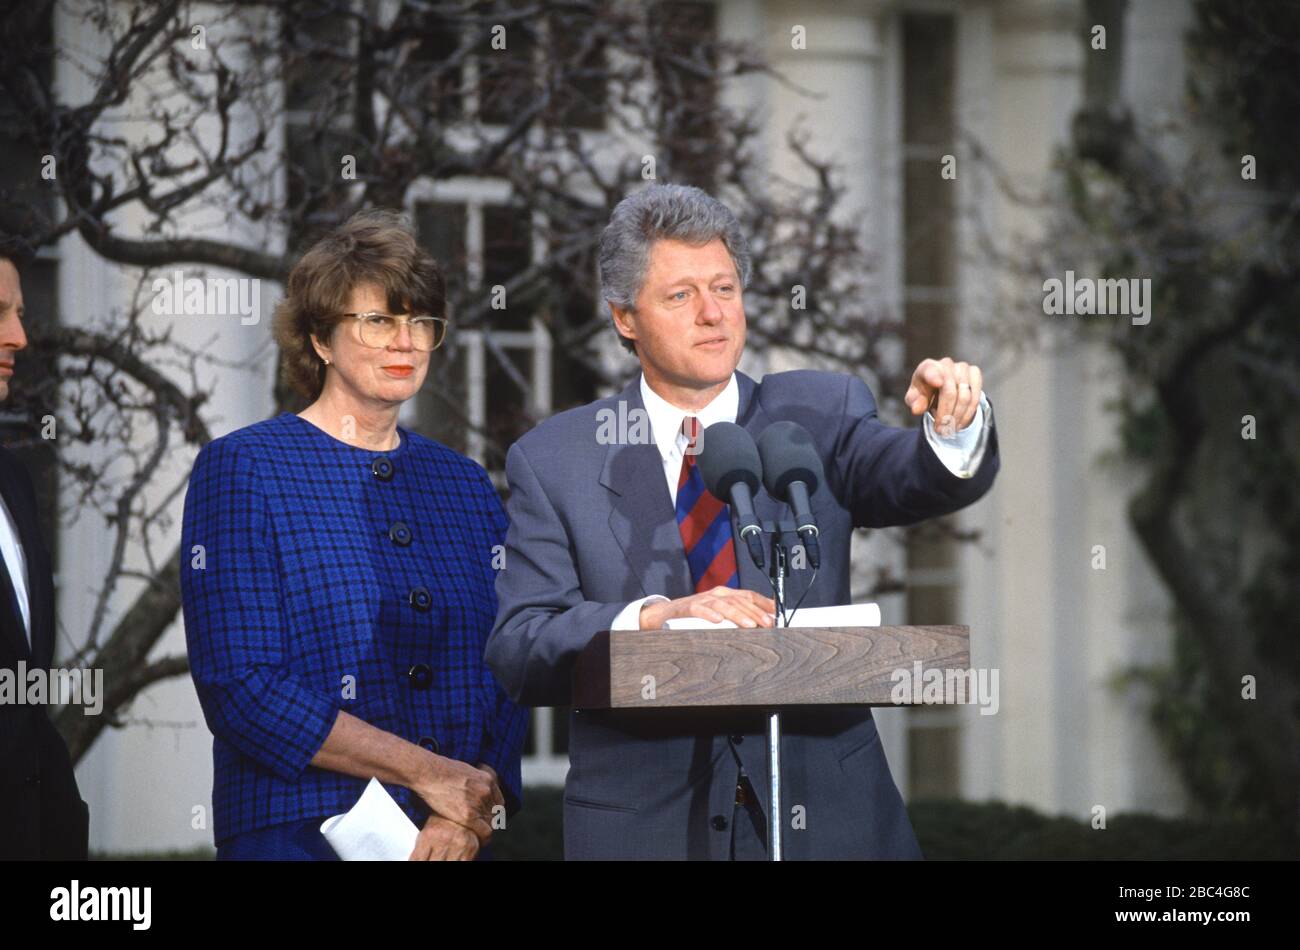 United States President Bill Clinton, right, introduces Janet Reno, State's Attorney for Miami-Dade County, Florida, as his choice to be the US Attorney General in the Rose Garden of the White House in Washington, DC on February 11, 1993. If confirmed, Ms. Reno will become the first woman to serve as US Attorney General.Credit: Howard L. Sachs/CNP | usage worldwide Stock Photo